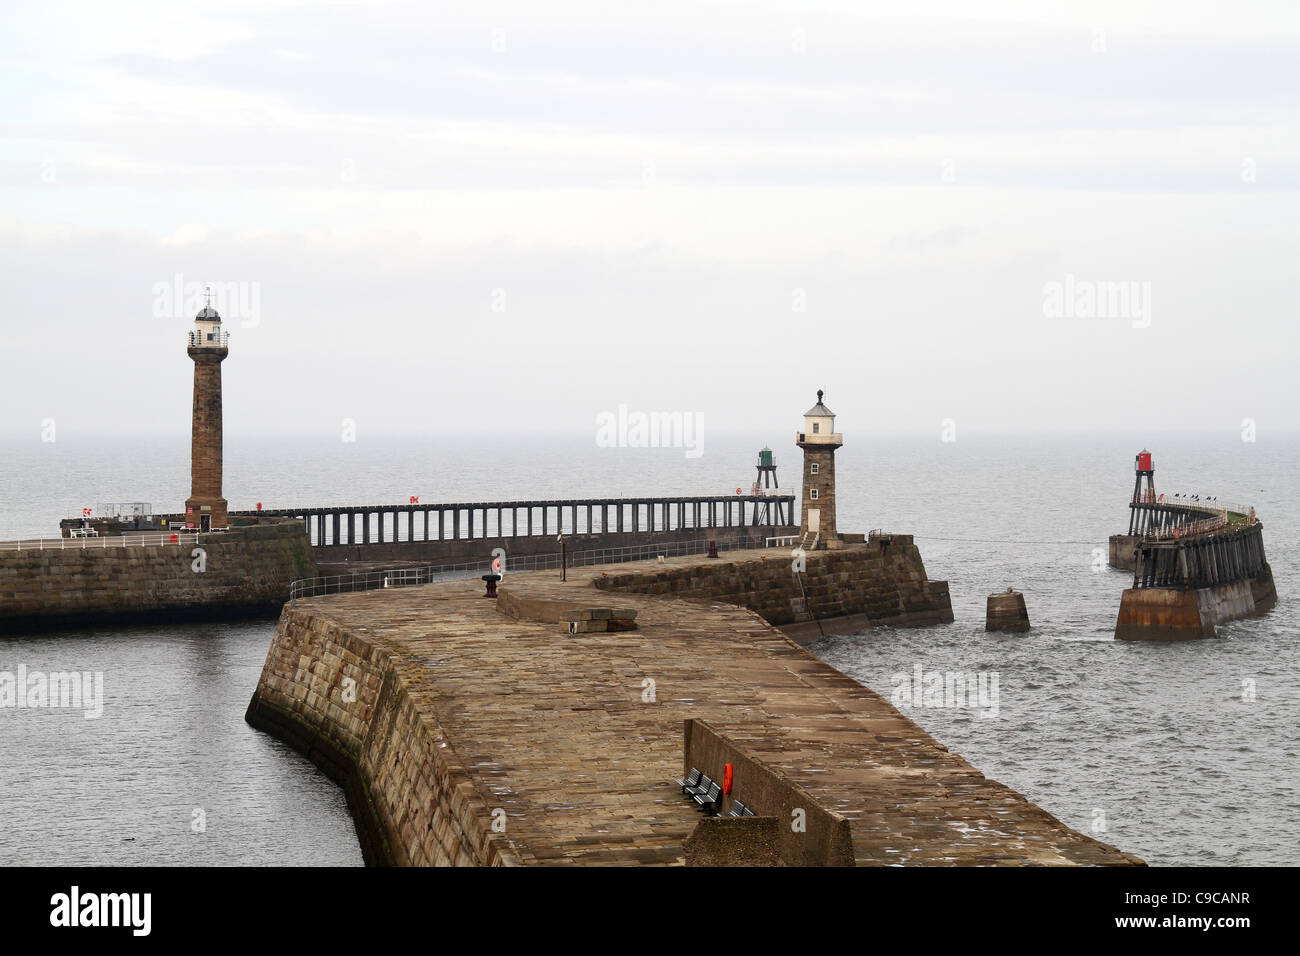 Whitby harbor, town and jetties. Stock Photo